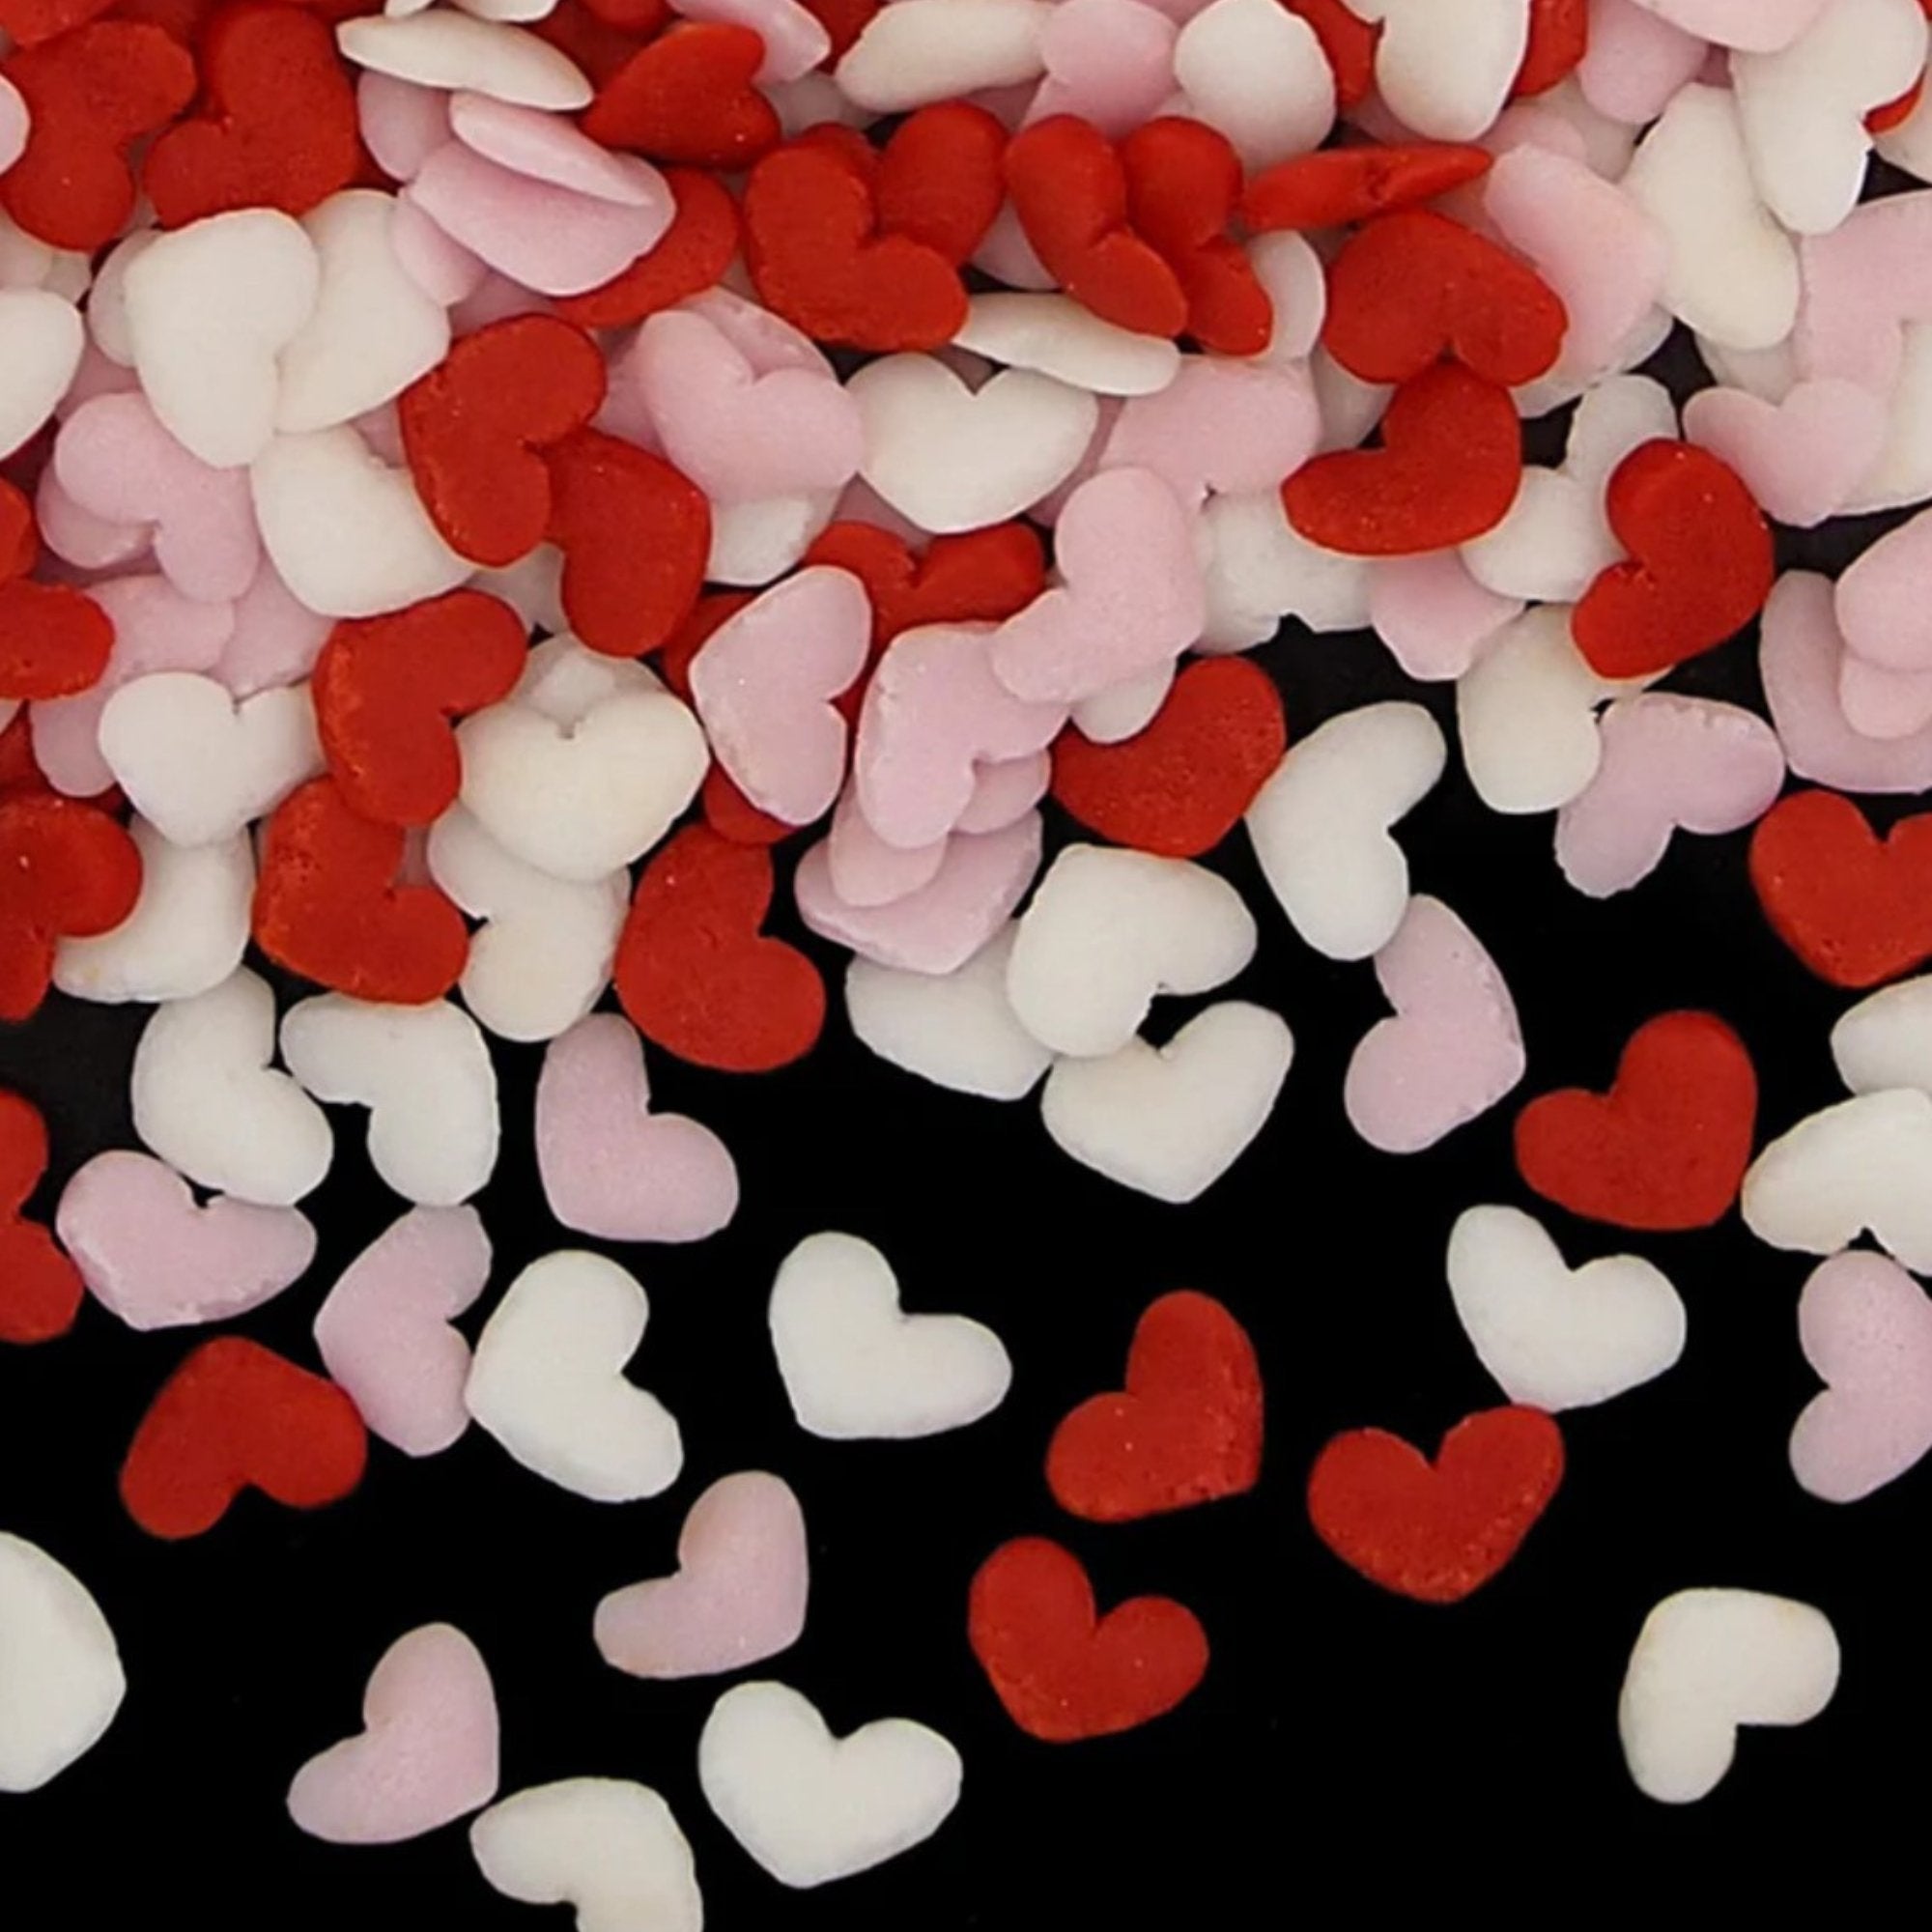 https://cdn.shopify.com/s/files/1/0276/4813/1165/products/all-natural-valentines-day-heart-confetti-sprinkles-954135.jpg?v=1701864106